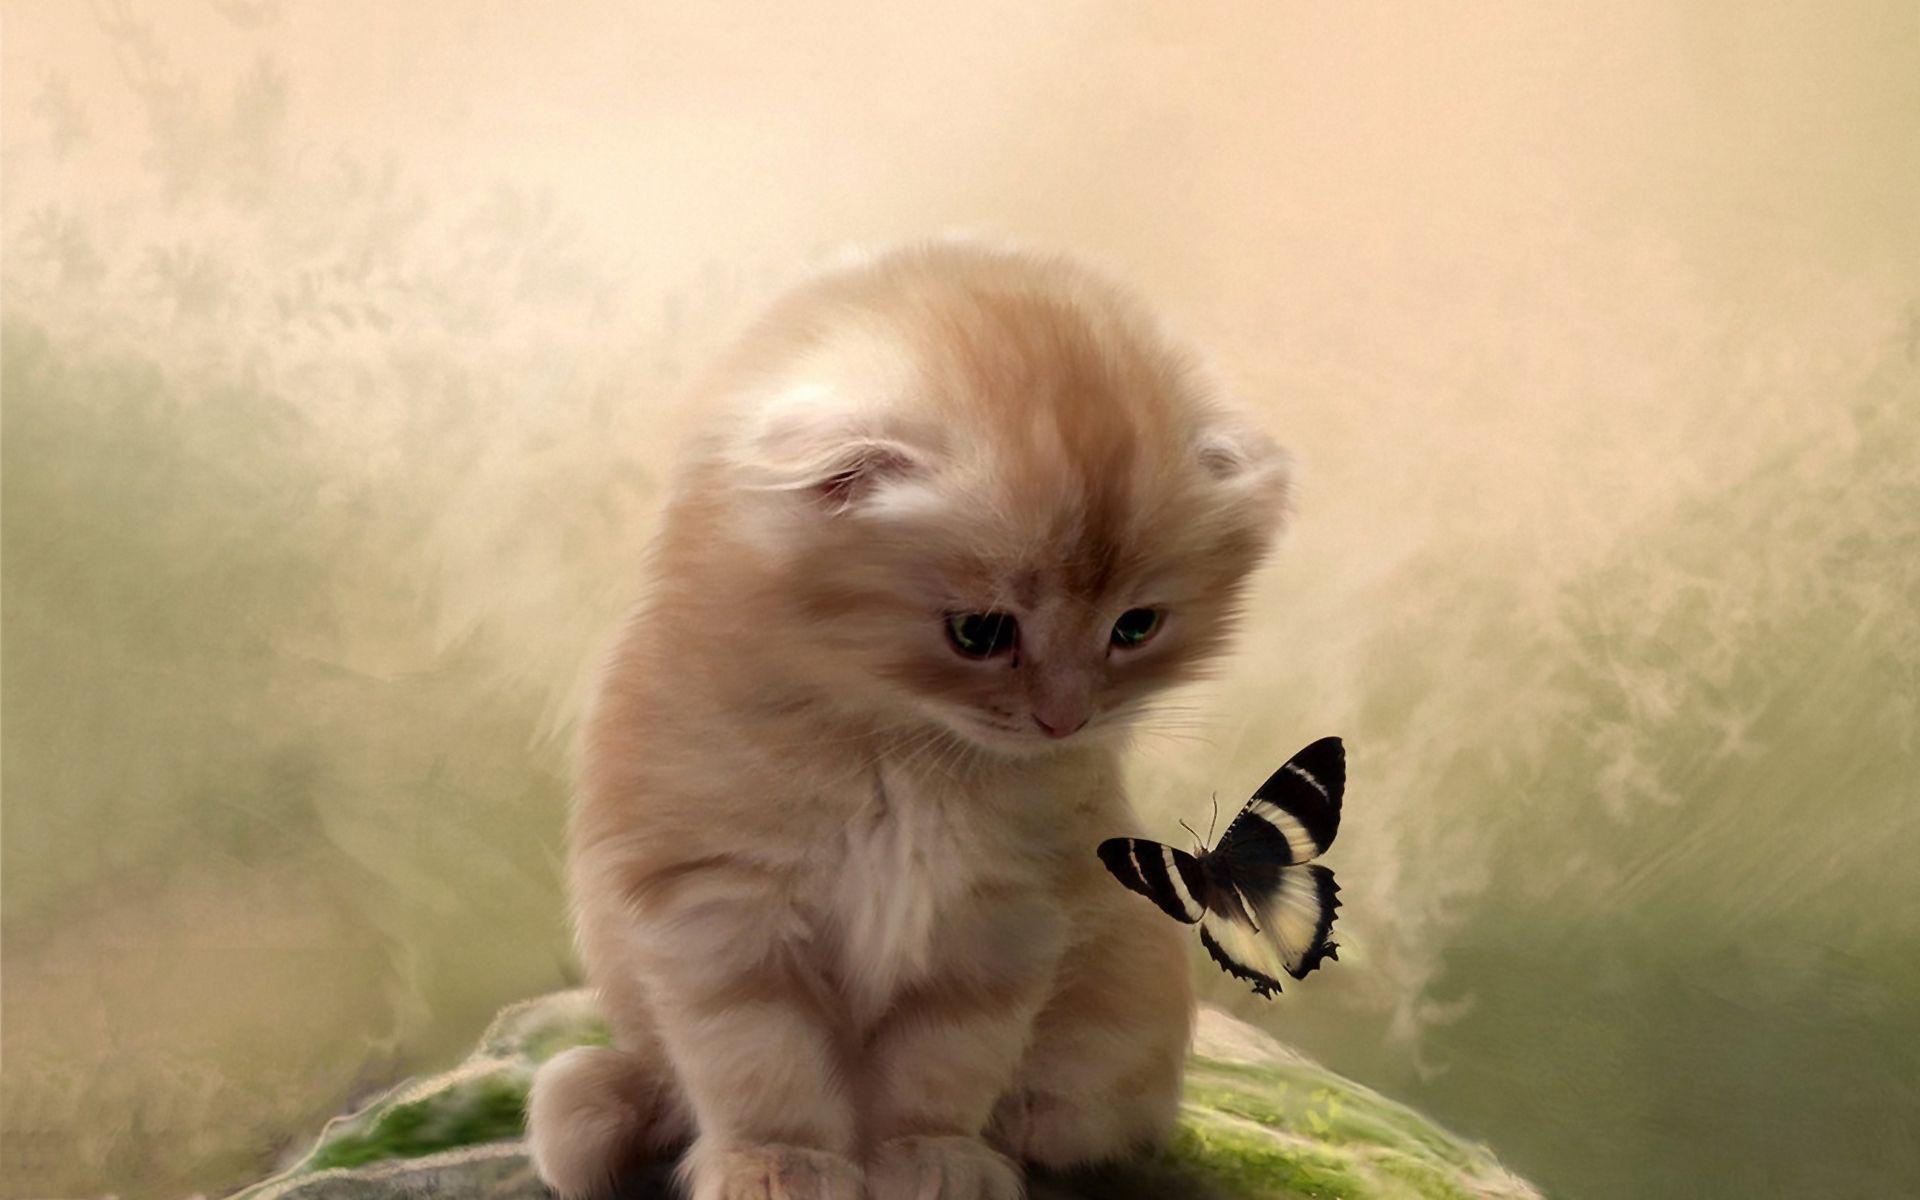 Kitty Playing With Butterfly, HD Animals, 4k Wallpaper, Image